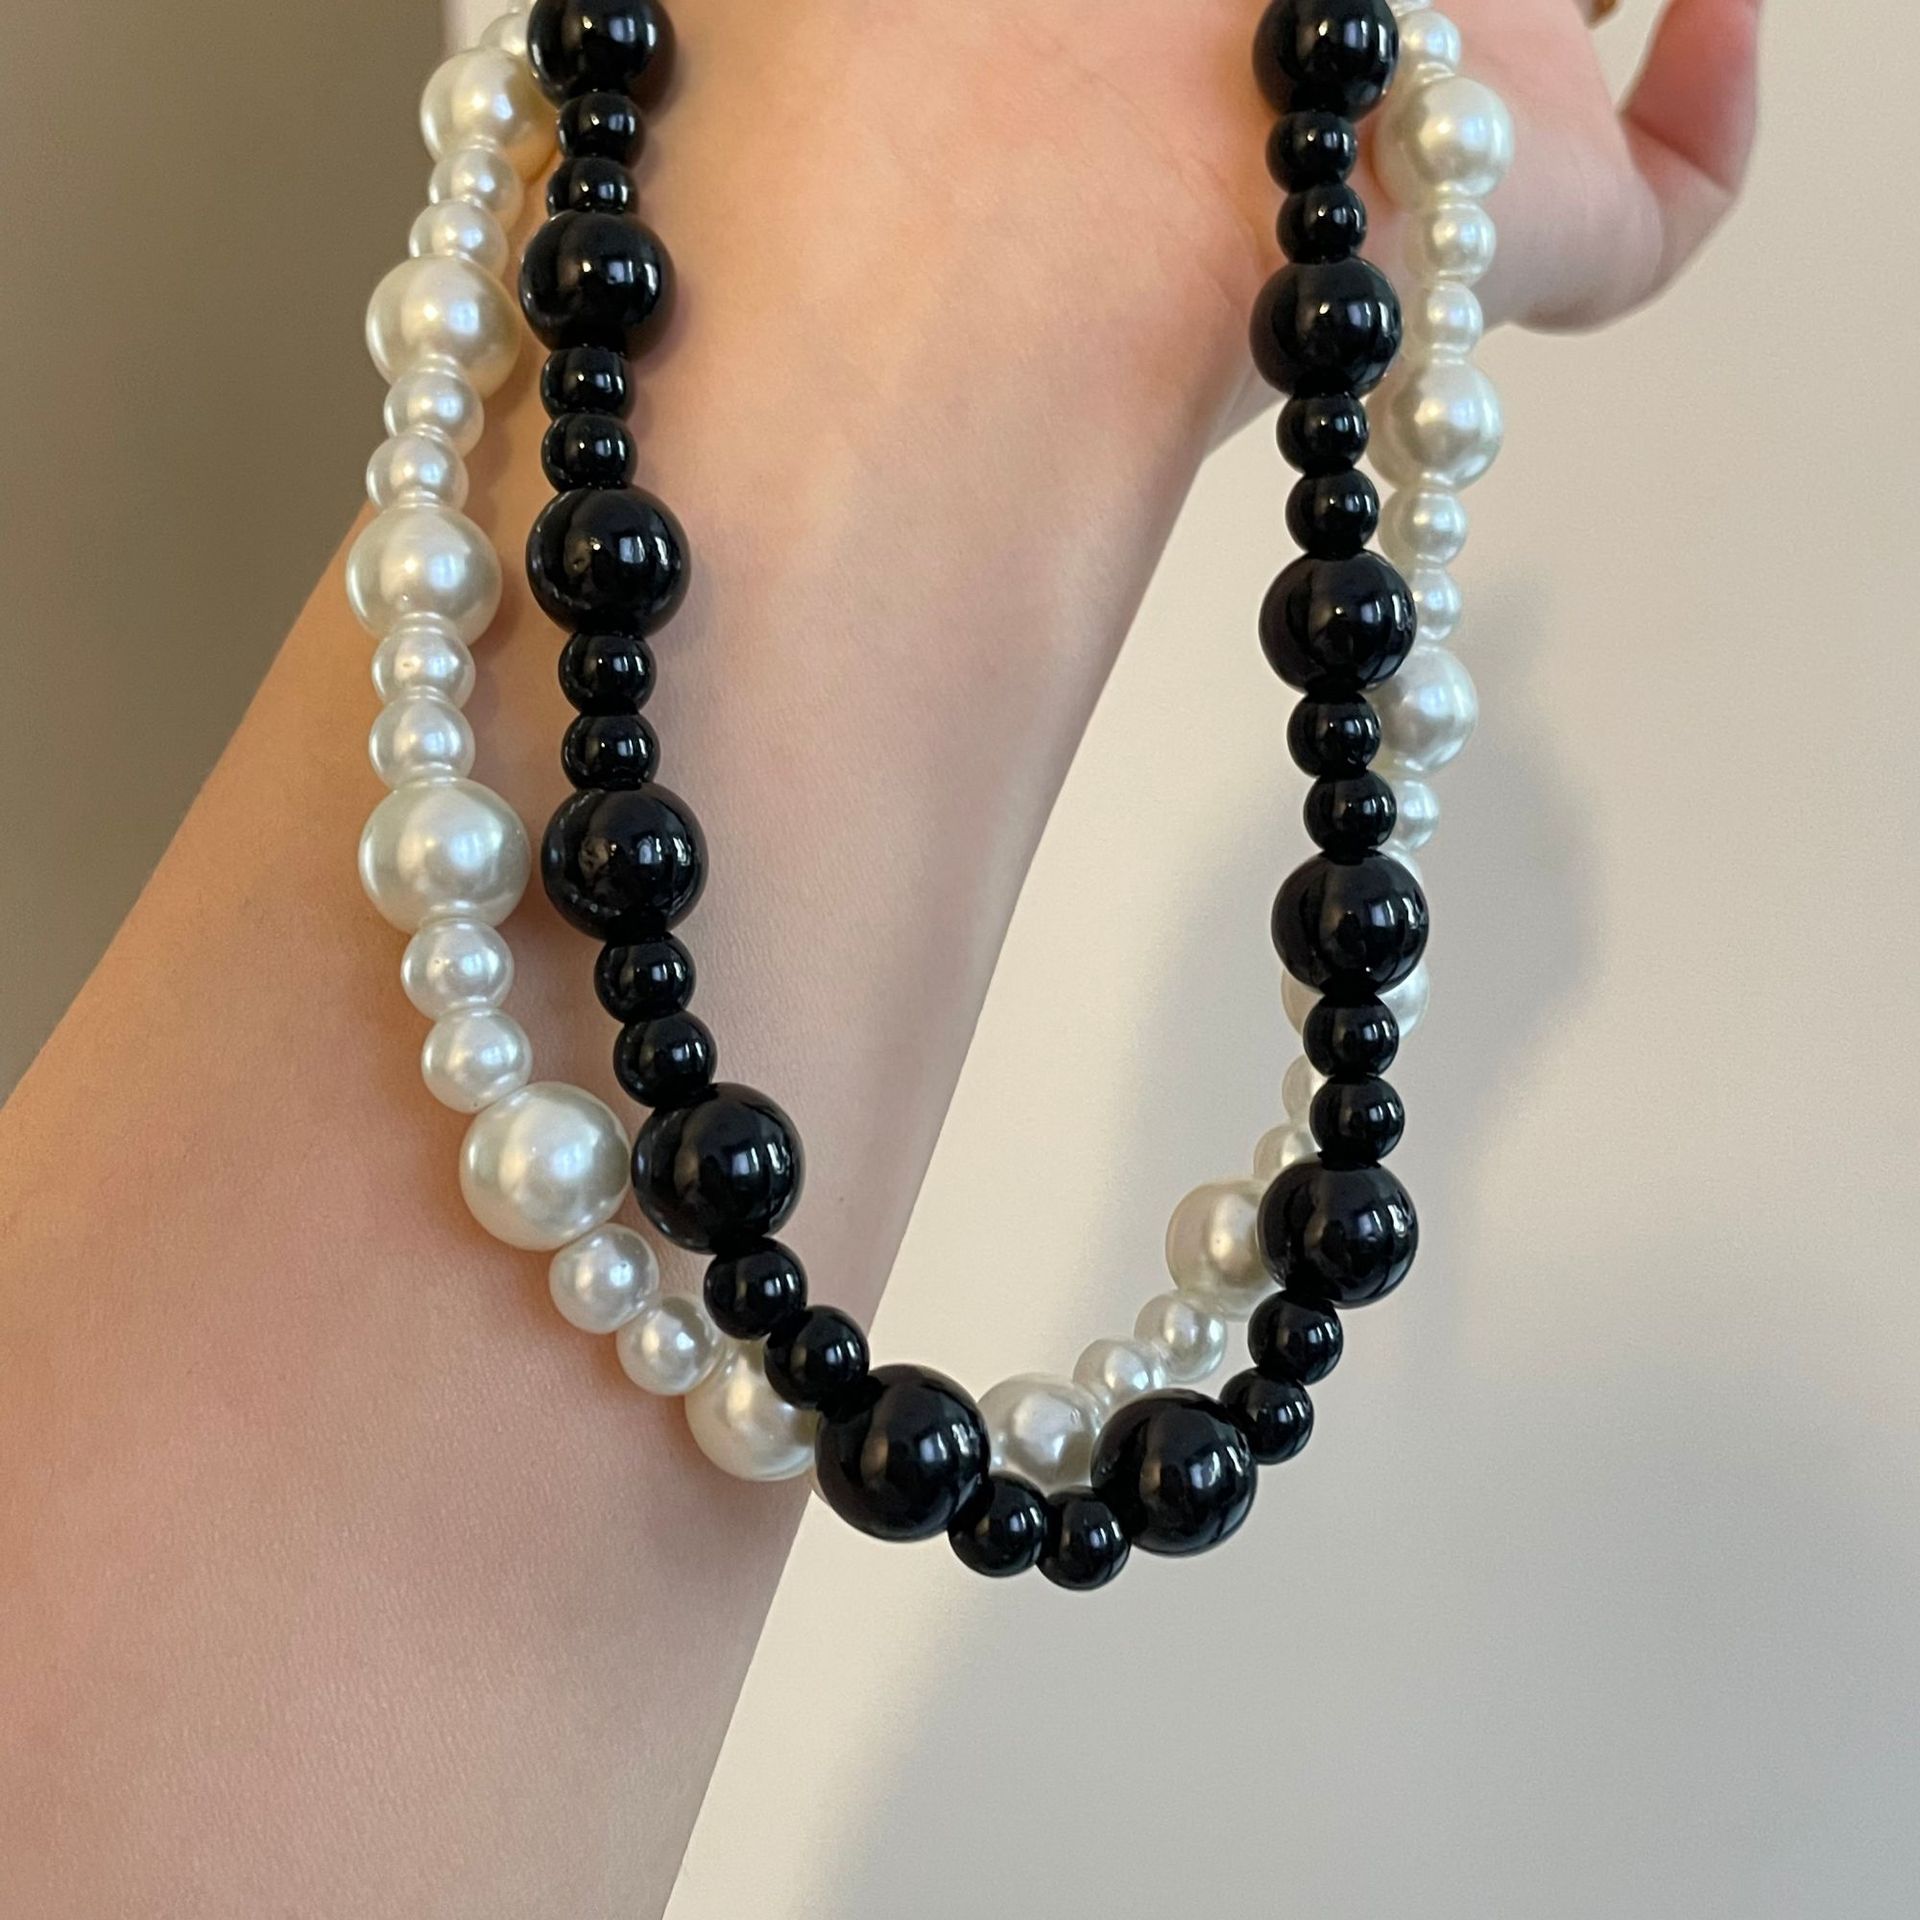 1:Black and white beads